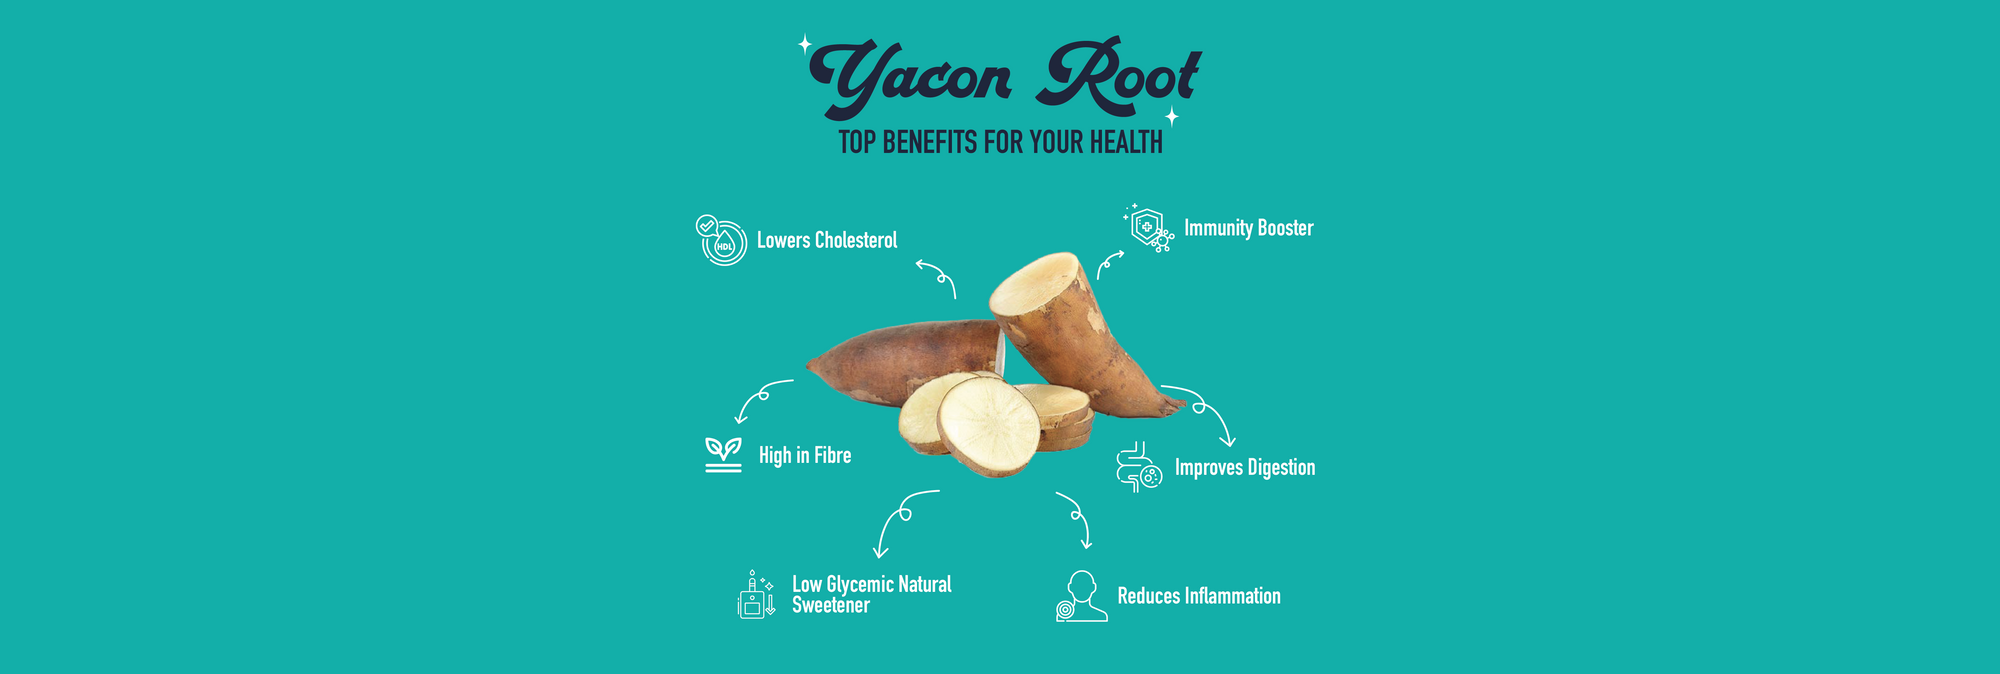 Why YACON ROOT is the latest trend in health foods